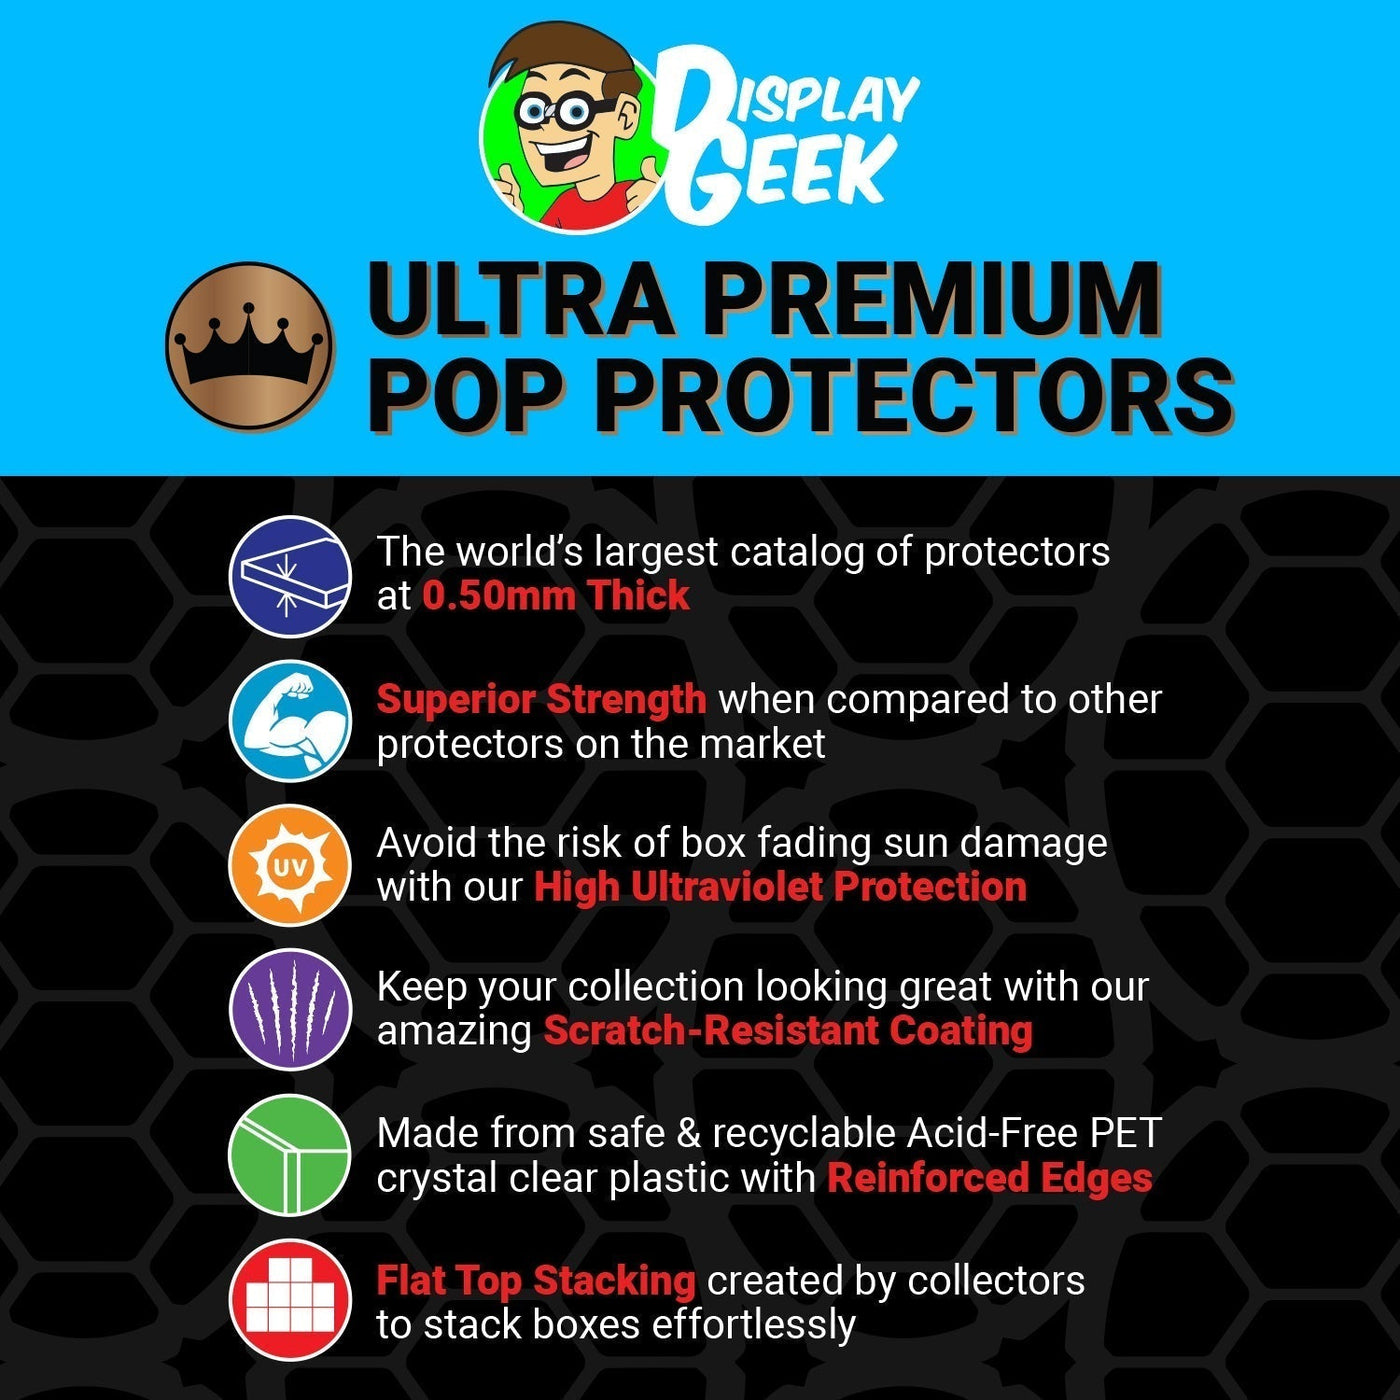 Pop Protector for Bob with Burger Cart #1224 Funko Pop Deluxe on The Protector Guide App by Display Geek